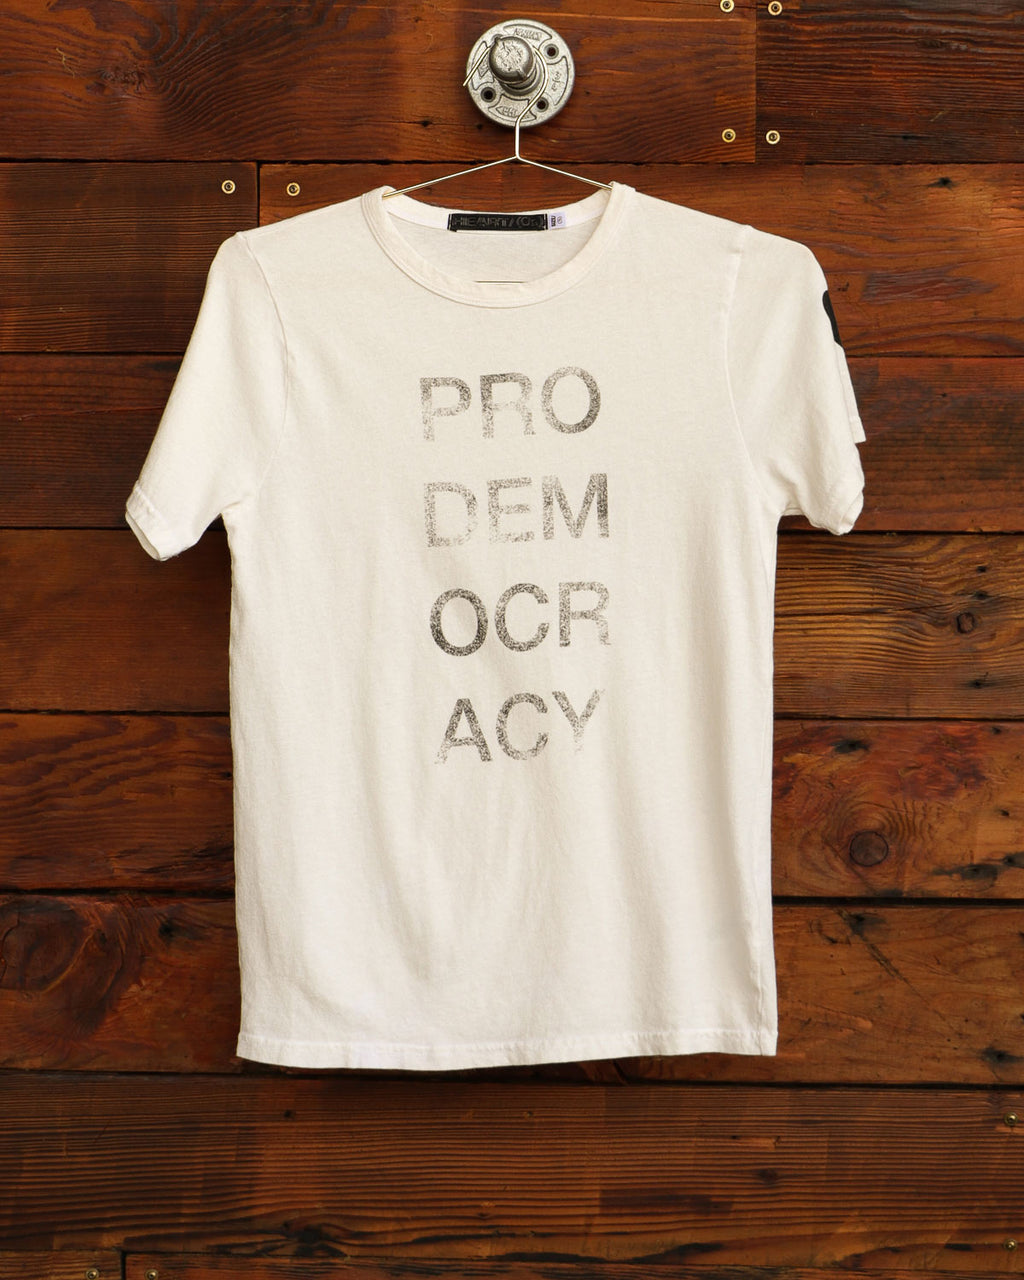 Pro democracy graphic tee in vintage white hanging on wood wall